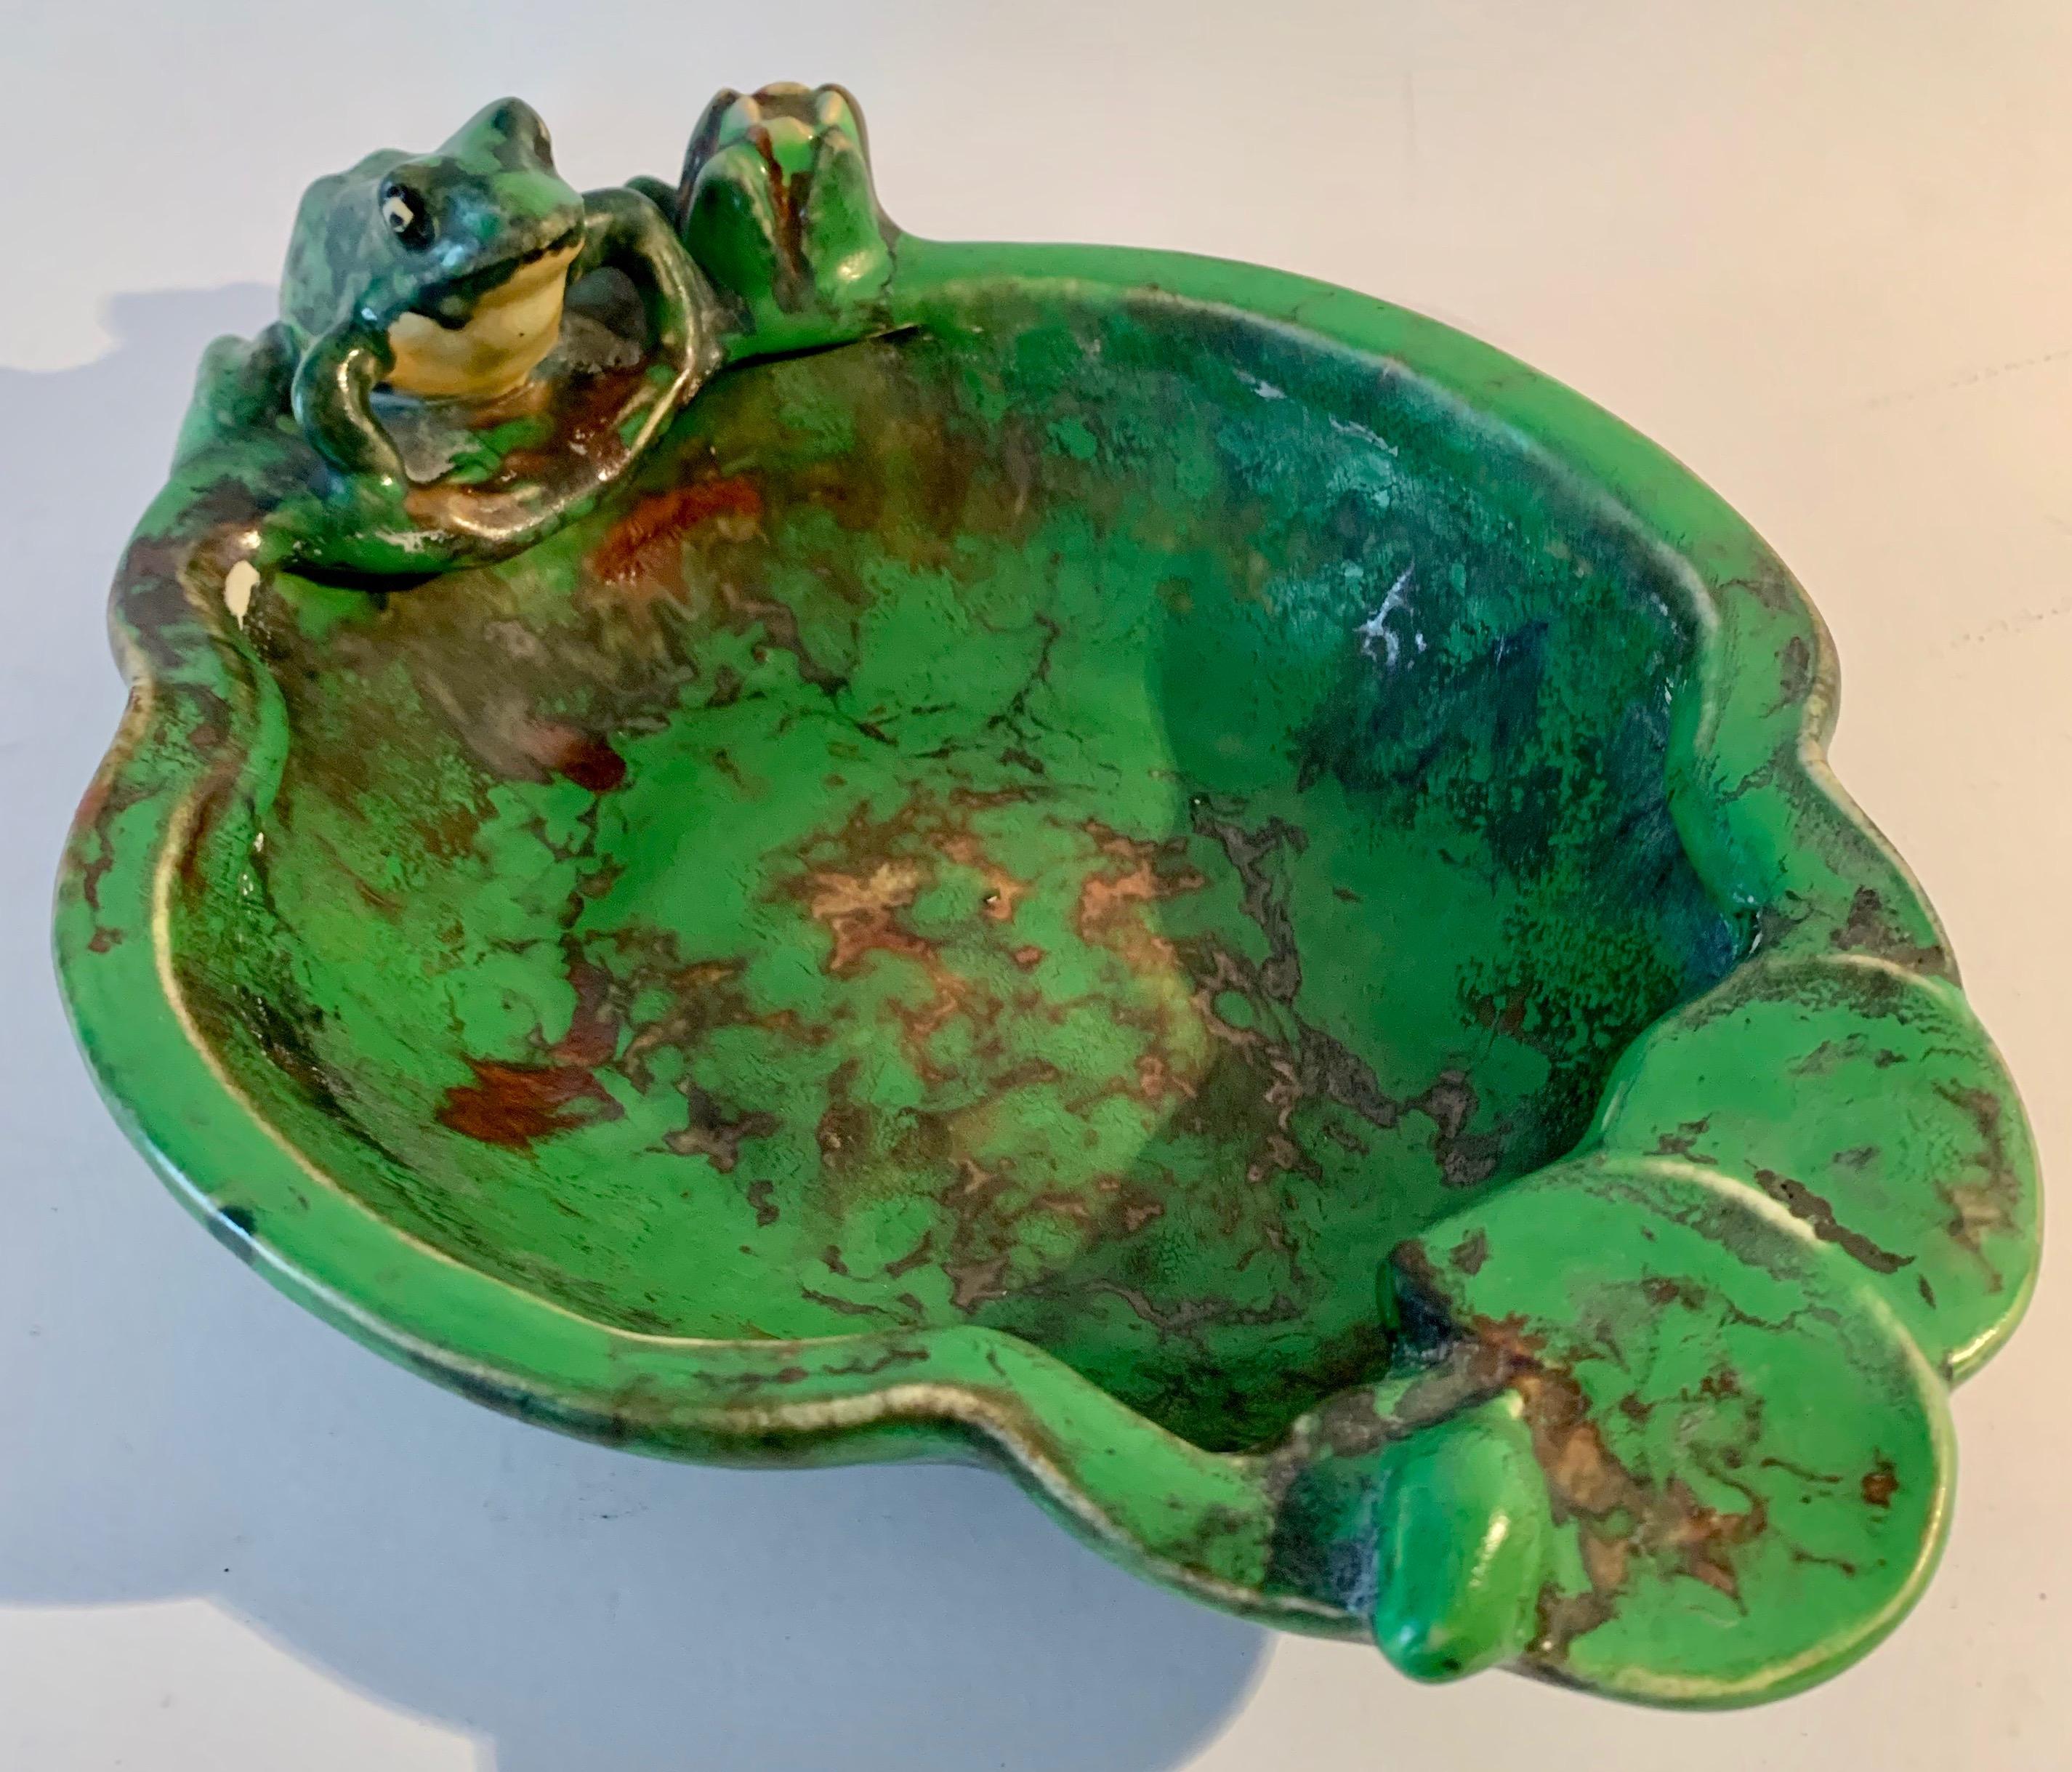 A wonderful bowl of Weller with a rookwood frog and flower. A dish with a frog sitting on a lily pad and in contemplation of getting a hamburger. The piece is numbered 